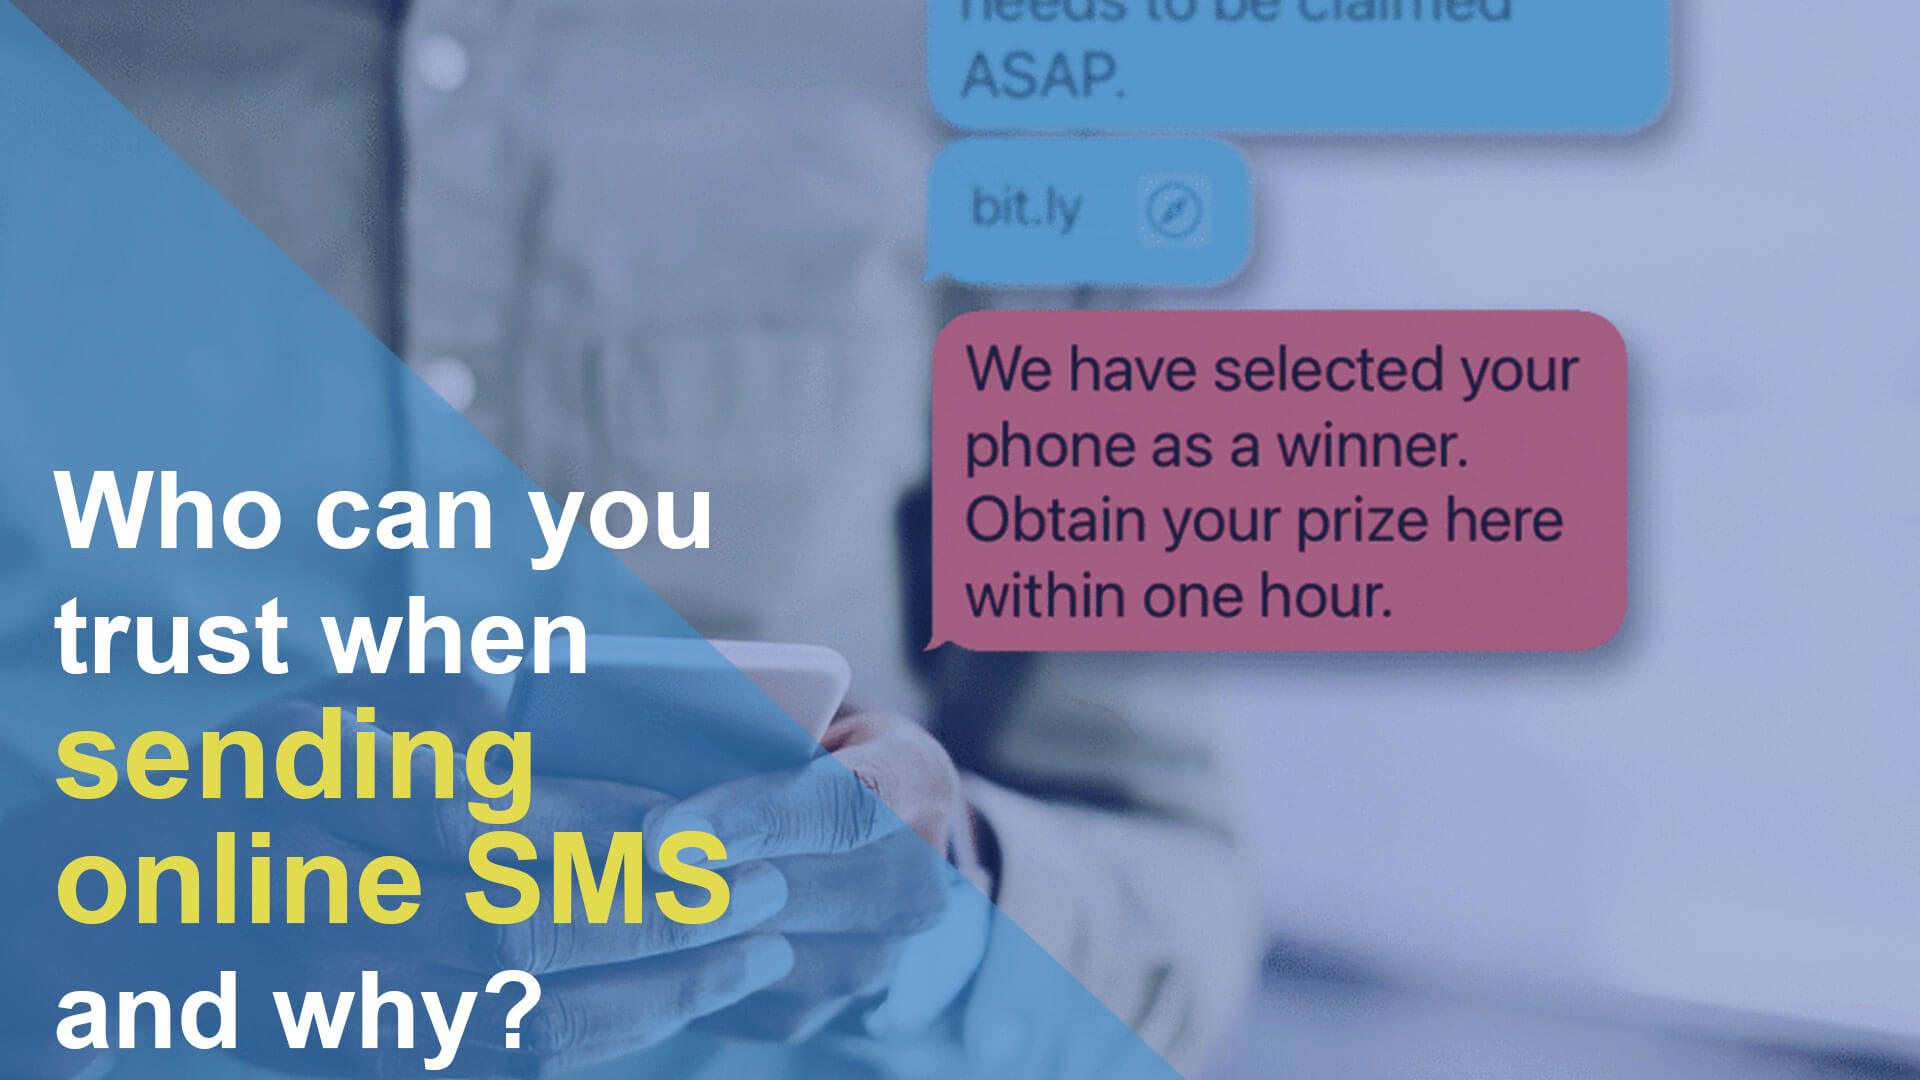 Who can you trust when sending online SMS and why?